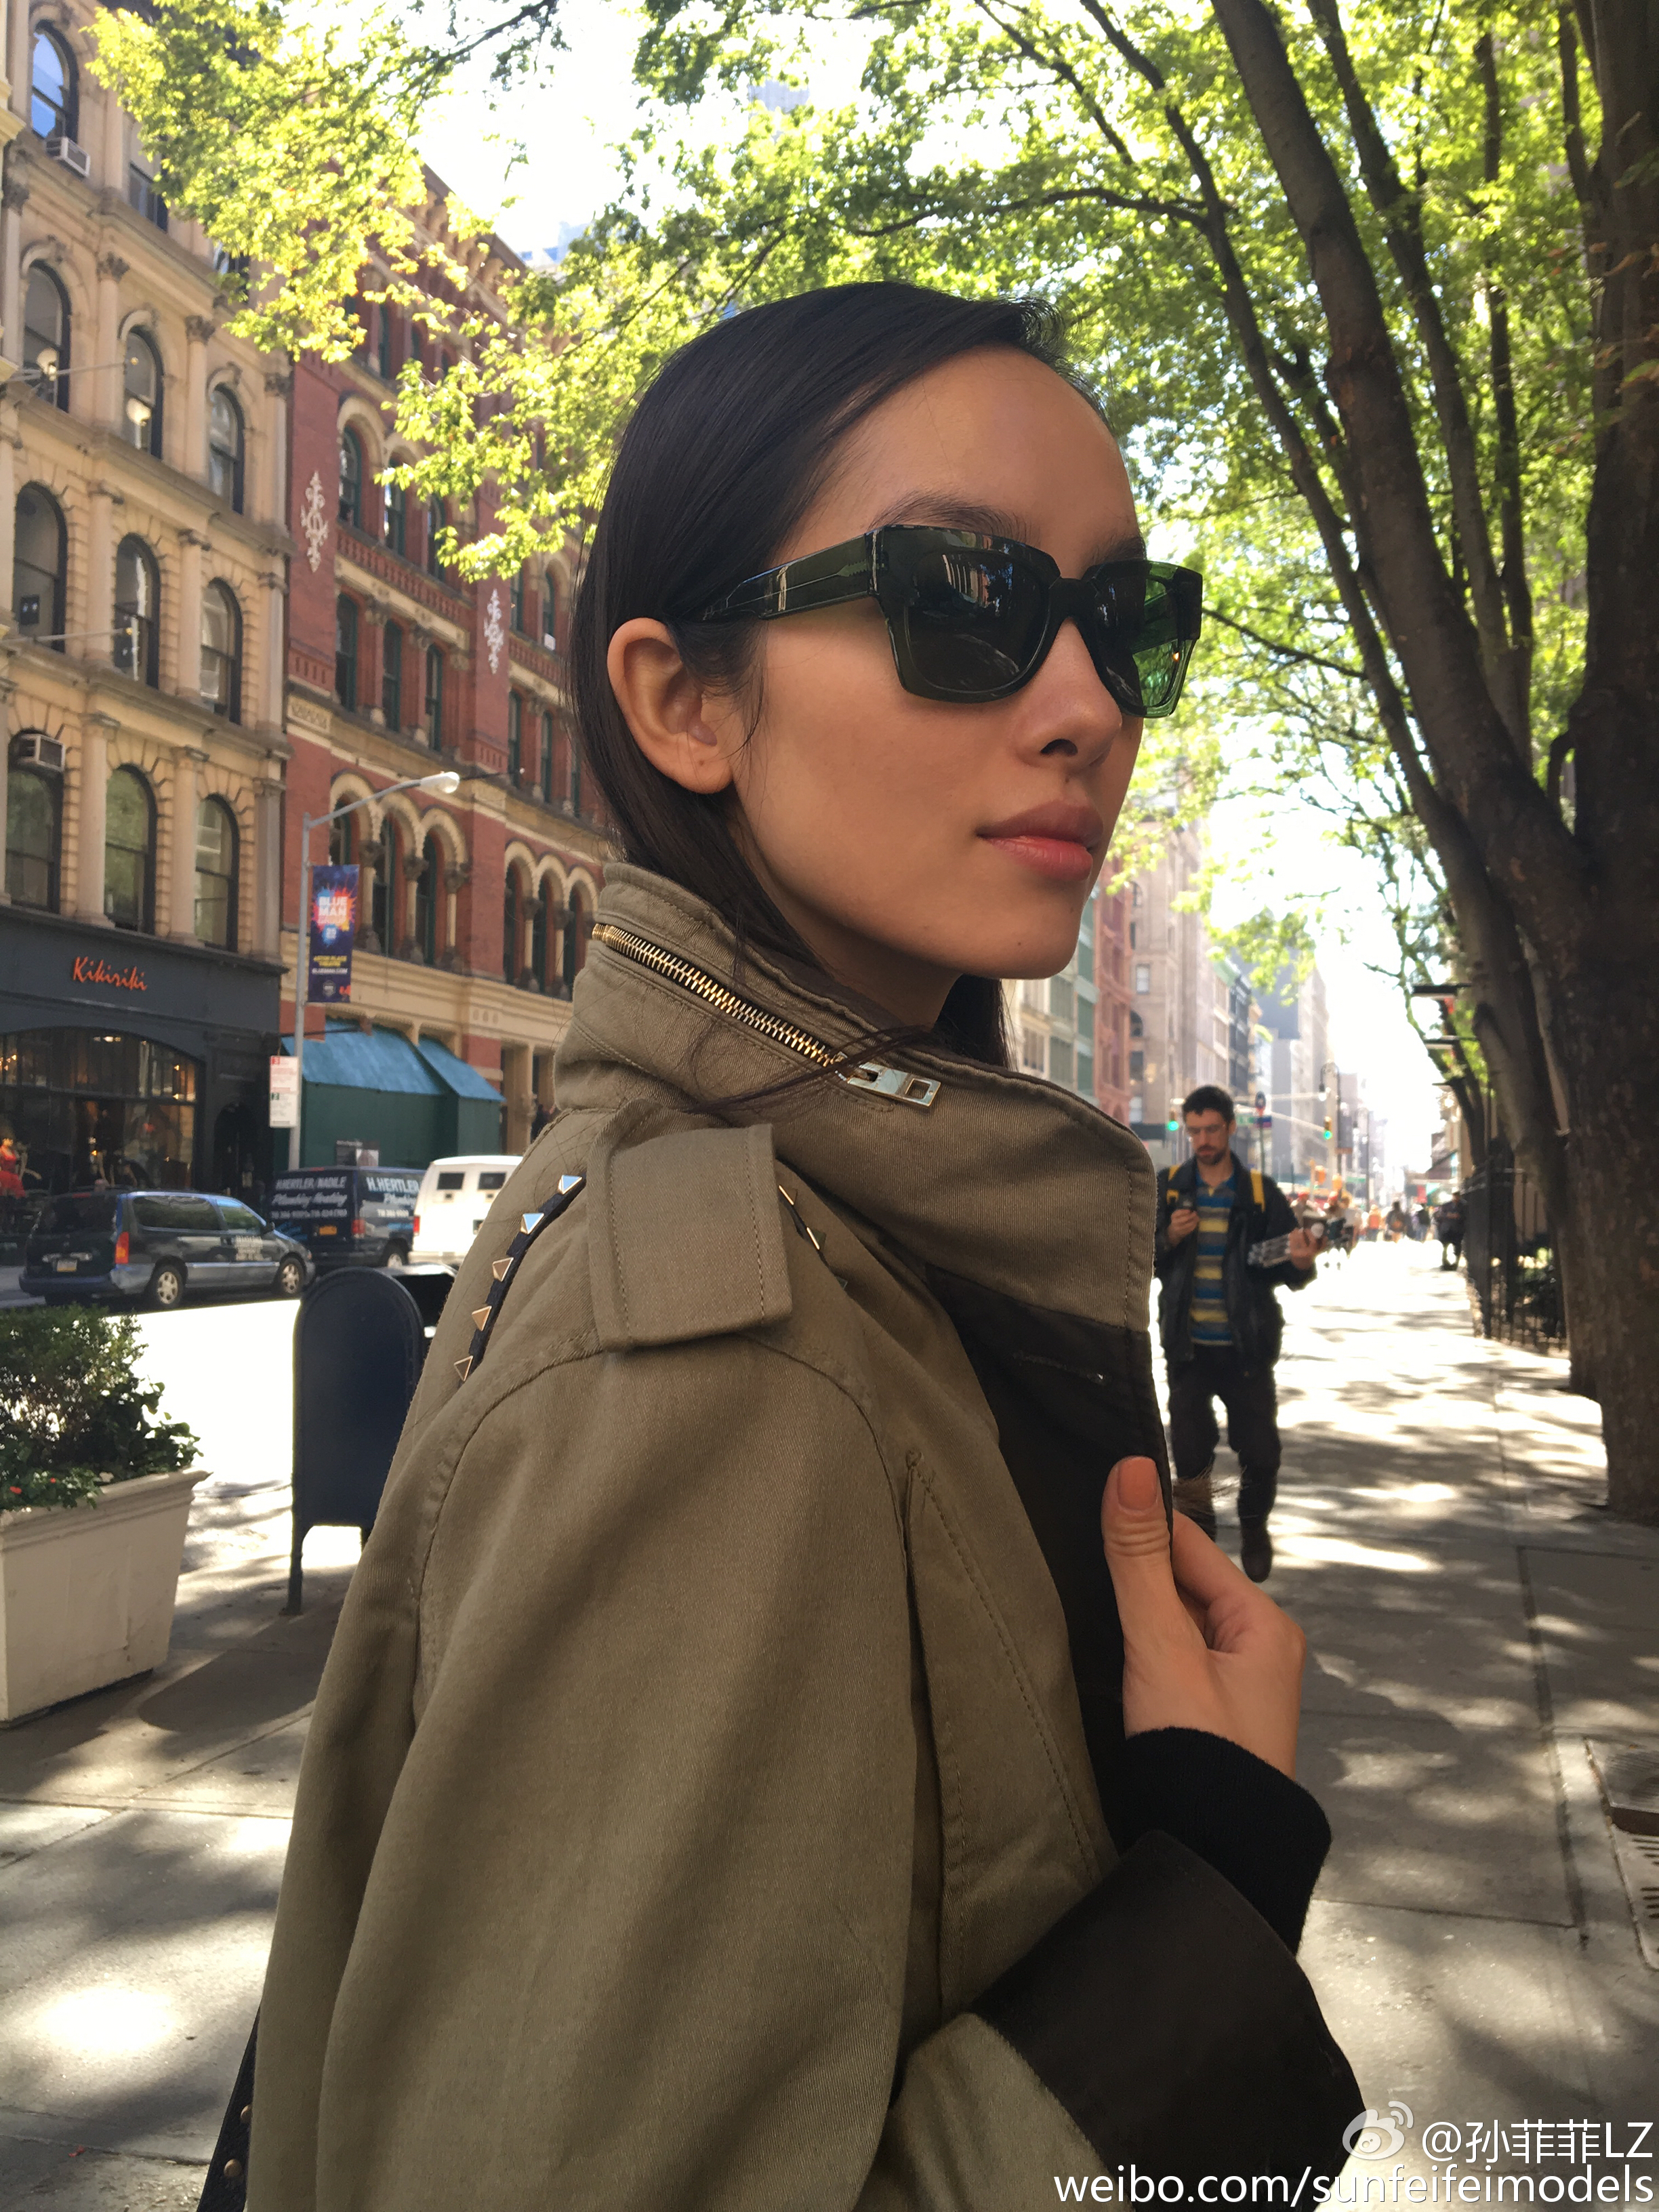 CANDIDS STYLE SHADES FLY OCT 16 FEIFEI 1